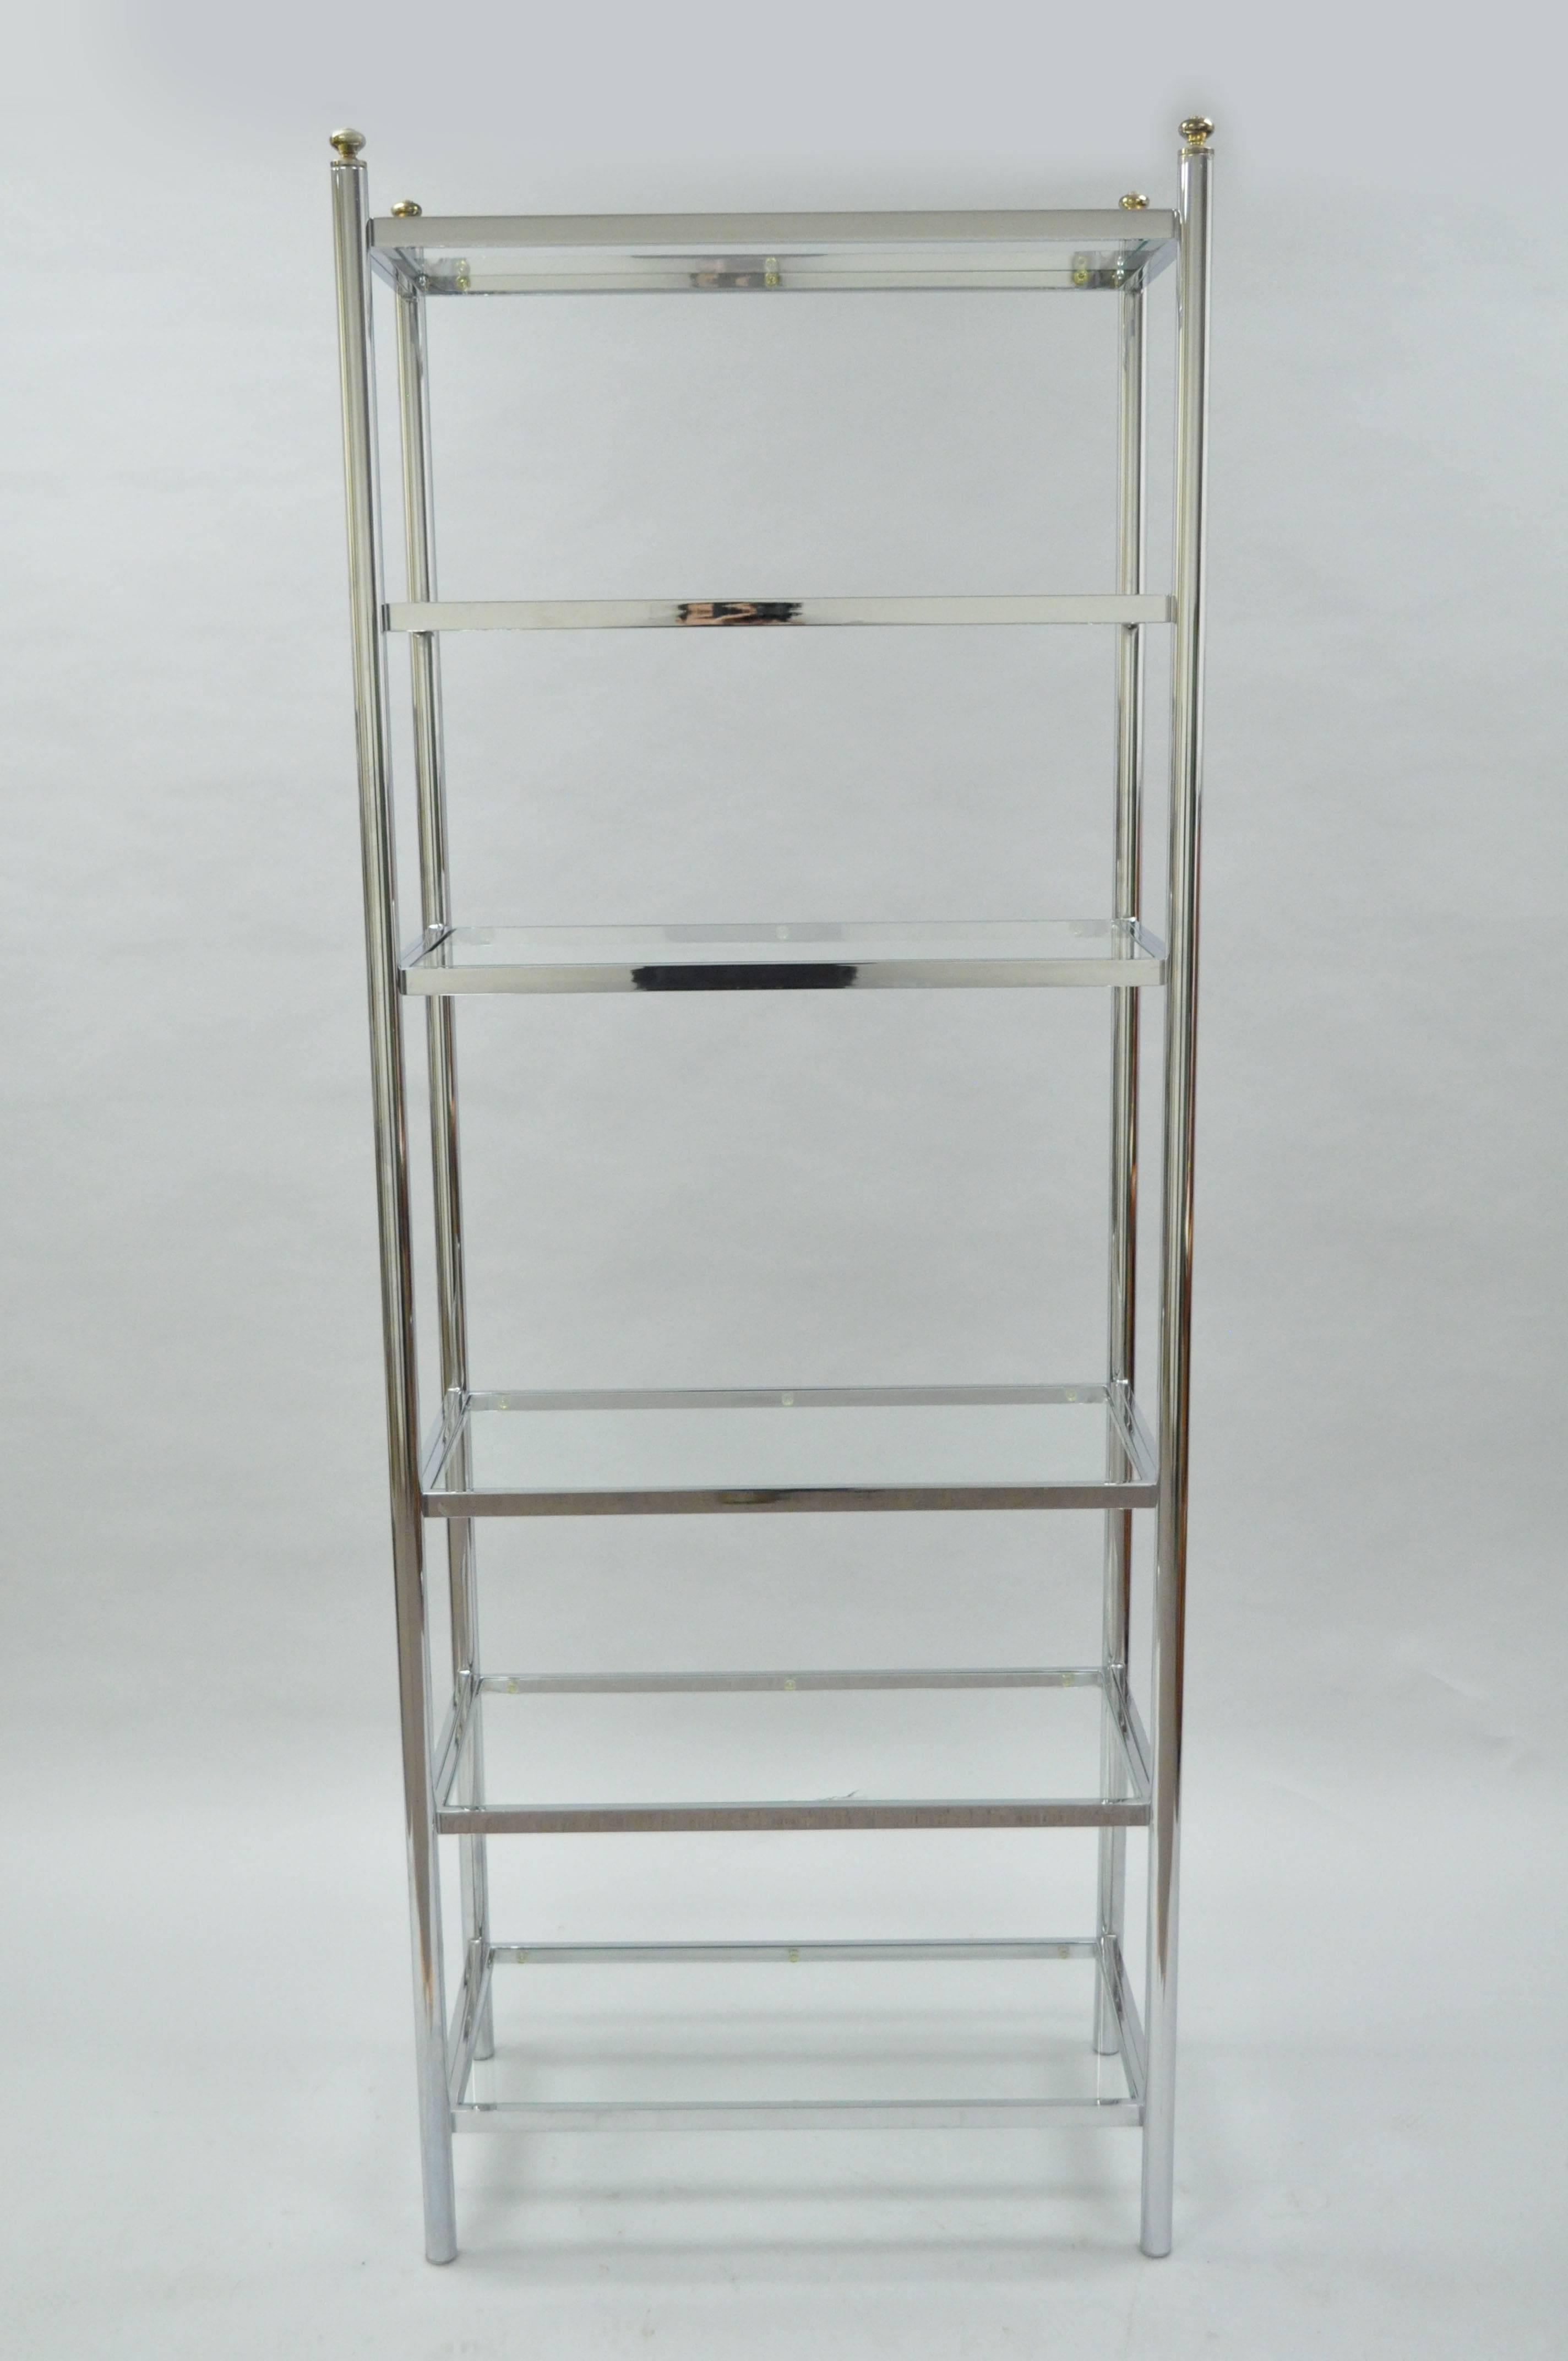 Vintage Mid-Century Modern polished chrome and glass six shelf tall and narrow étagère bookcase. Item features six inset glass shelves (including the top shelf), brass finials, clean modernist lines, great quality and form. In the Maison Jansen